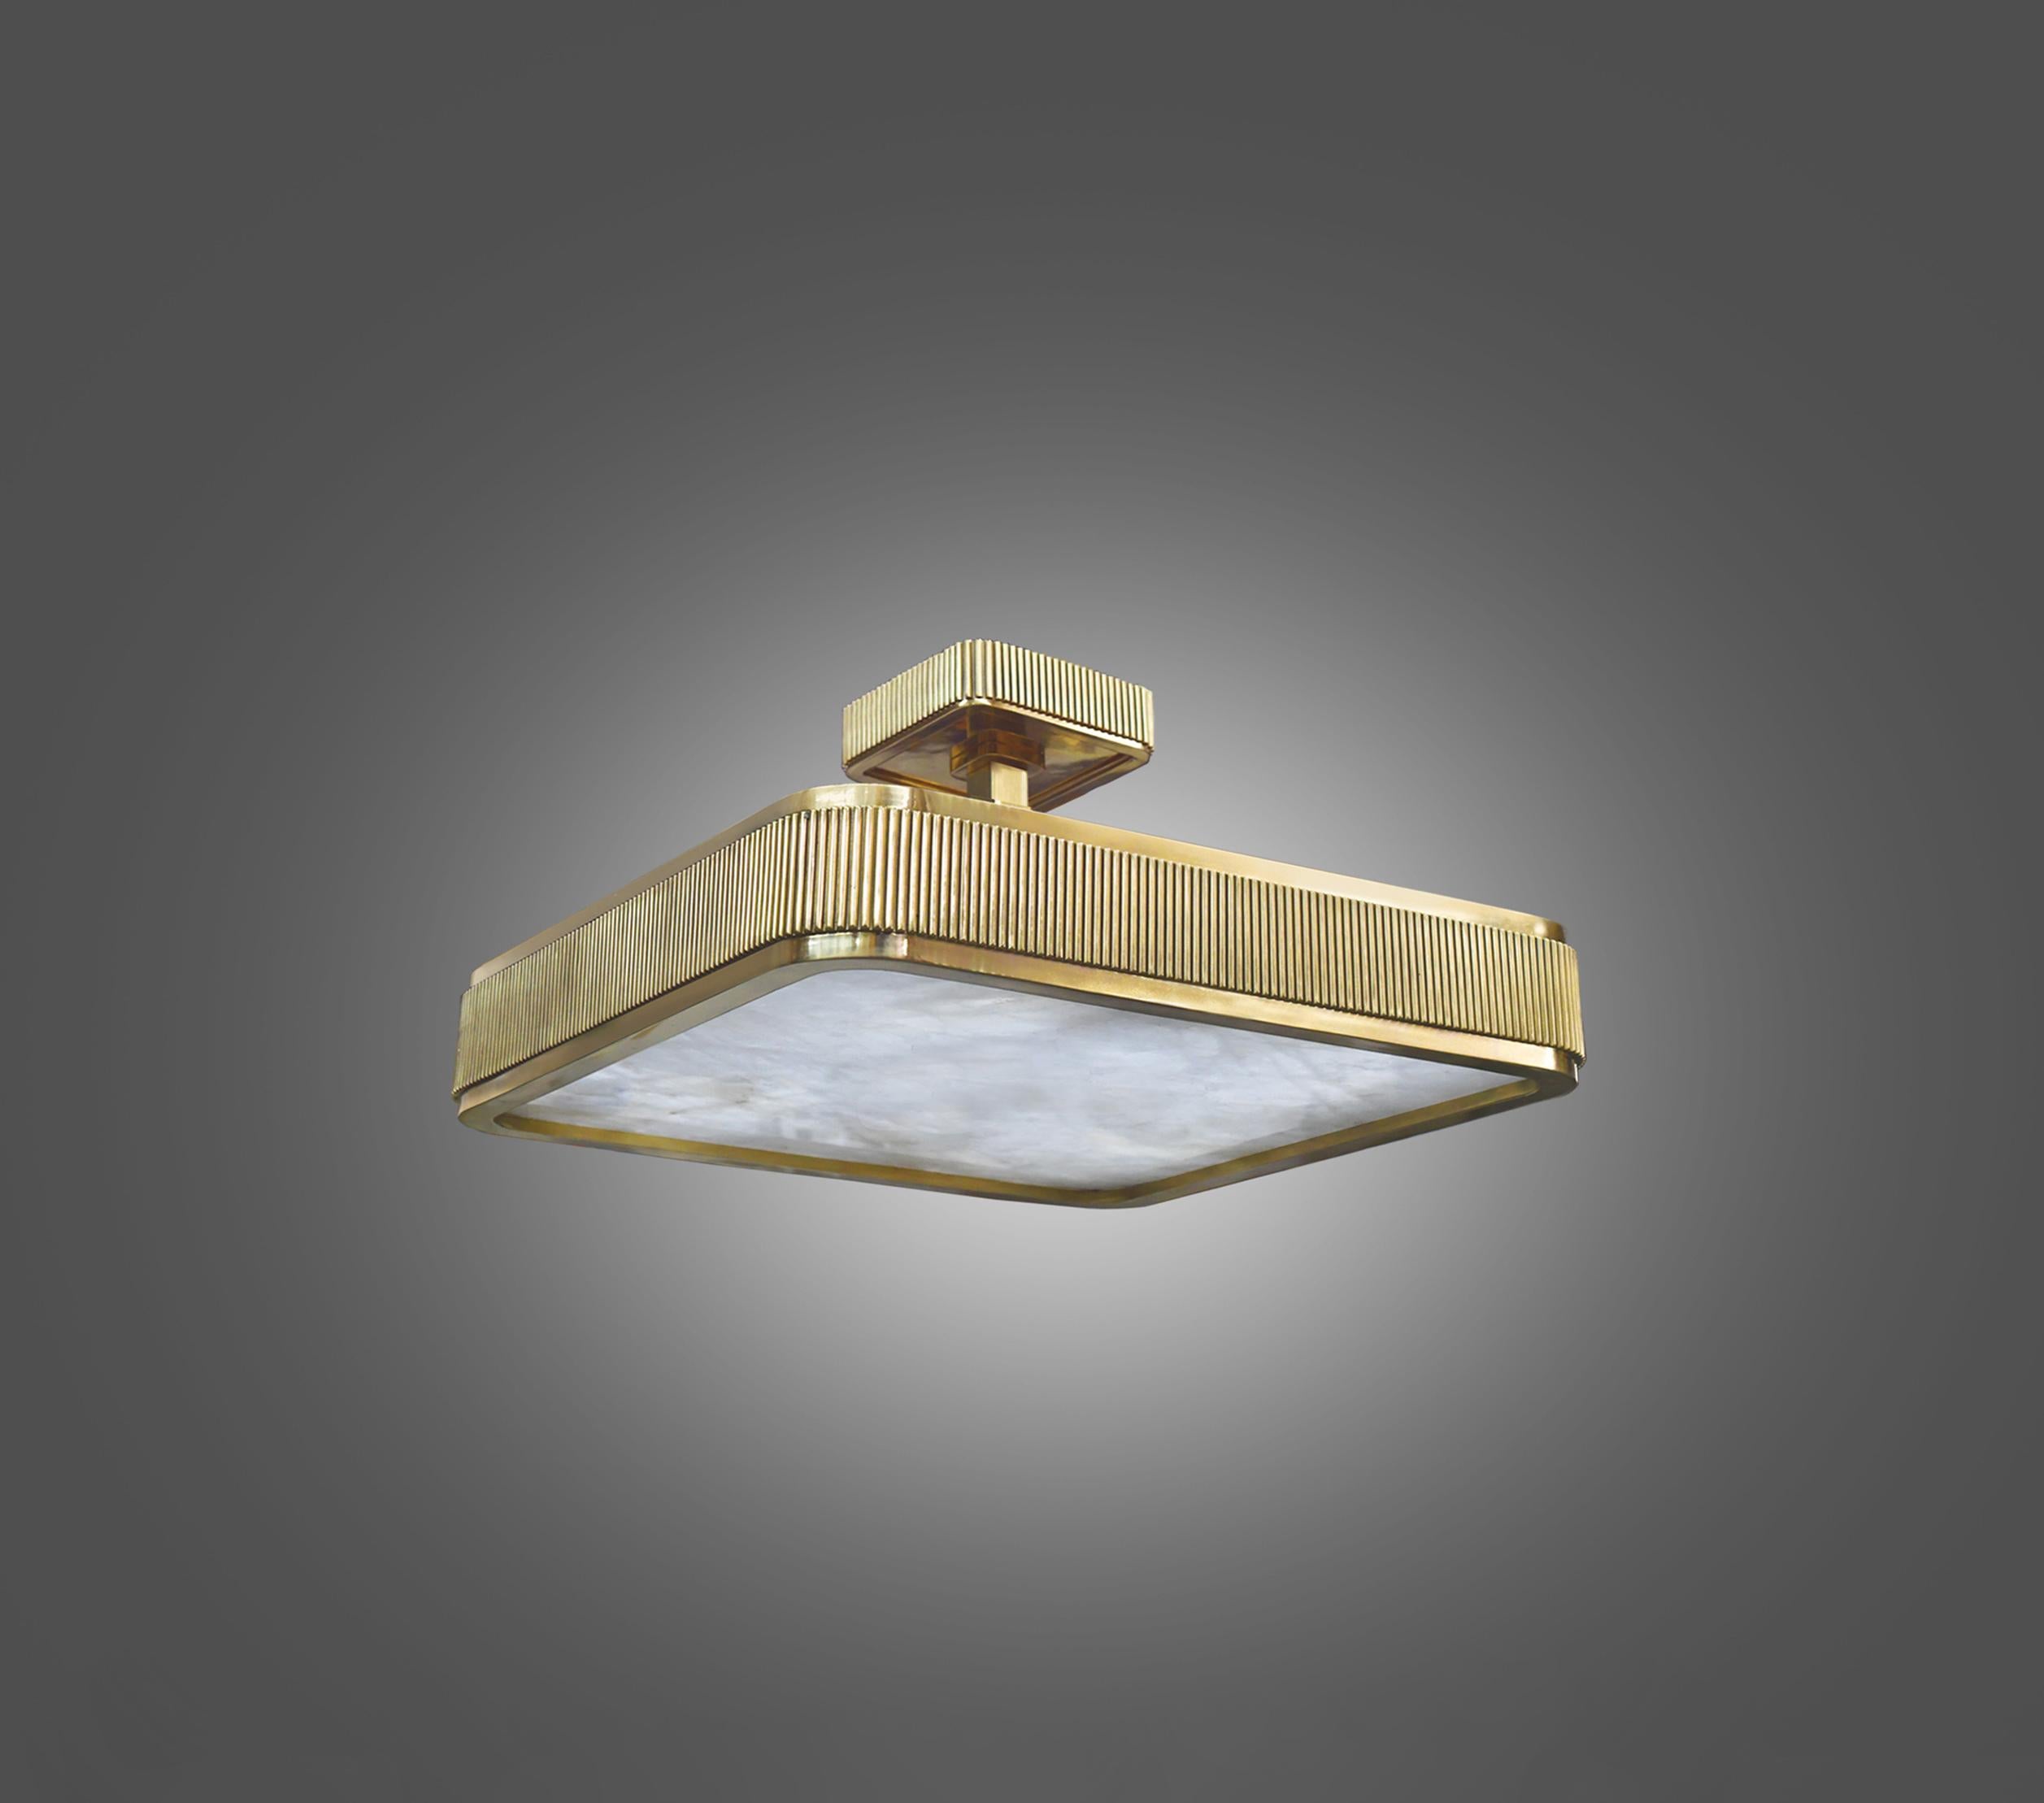 Elegant form polished brass frame with rock crystal panel, BSO rock crystal semi flushmount. Created by Phoenix, NYC.

Height can be adjustable.

Lutron dimmer system. 
Each fixture installs four E26 base sockets. 
Use four 60W each LED light